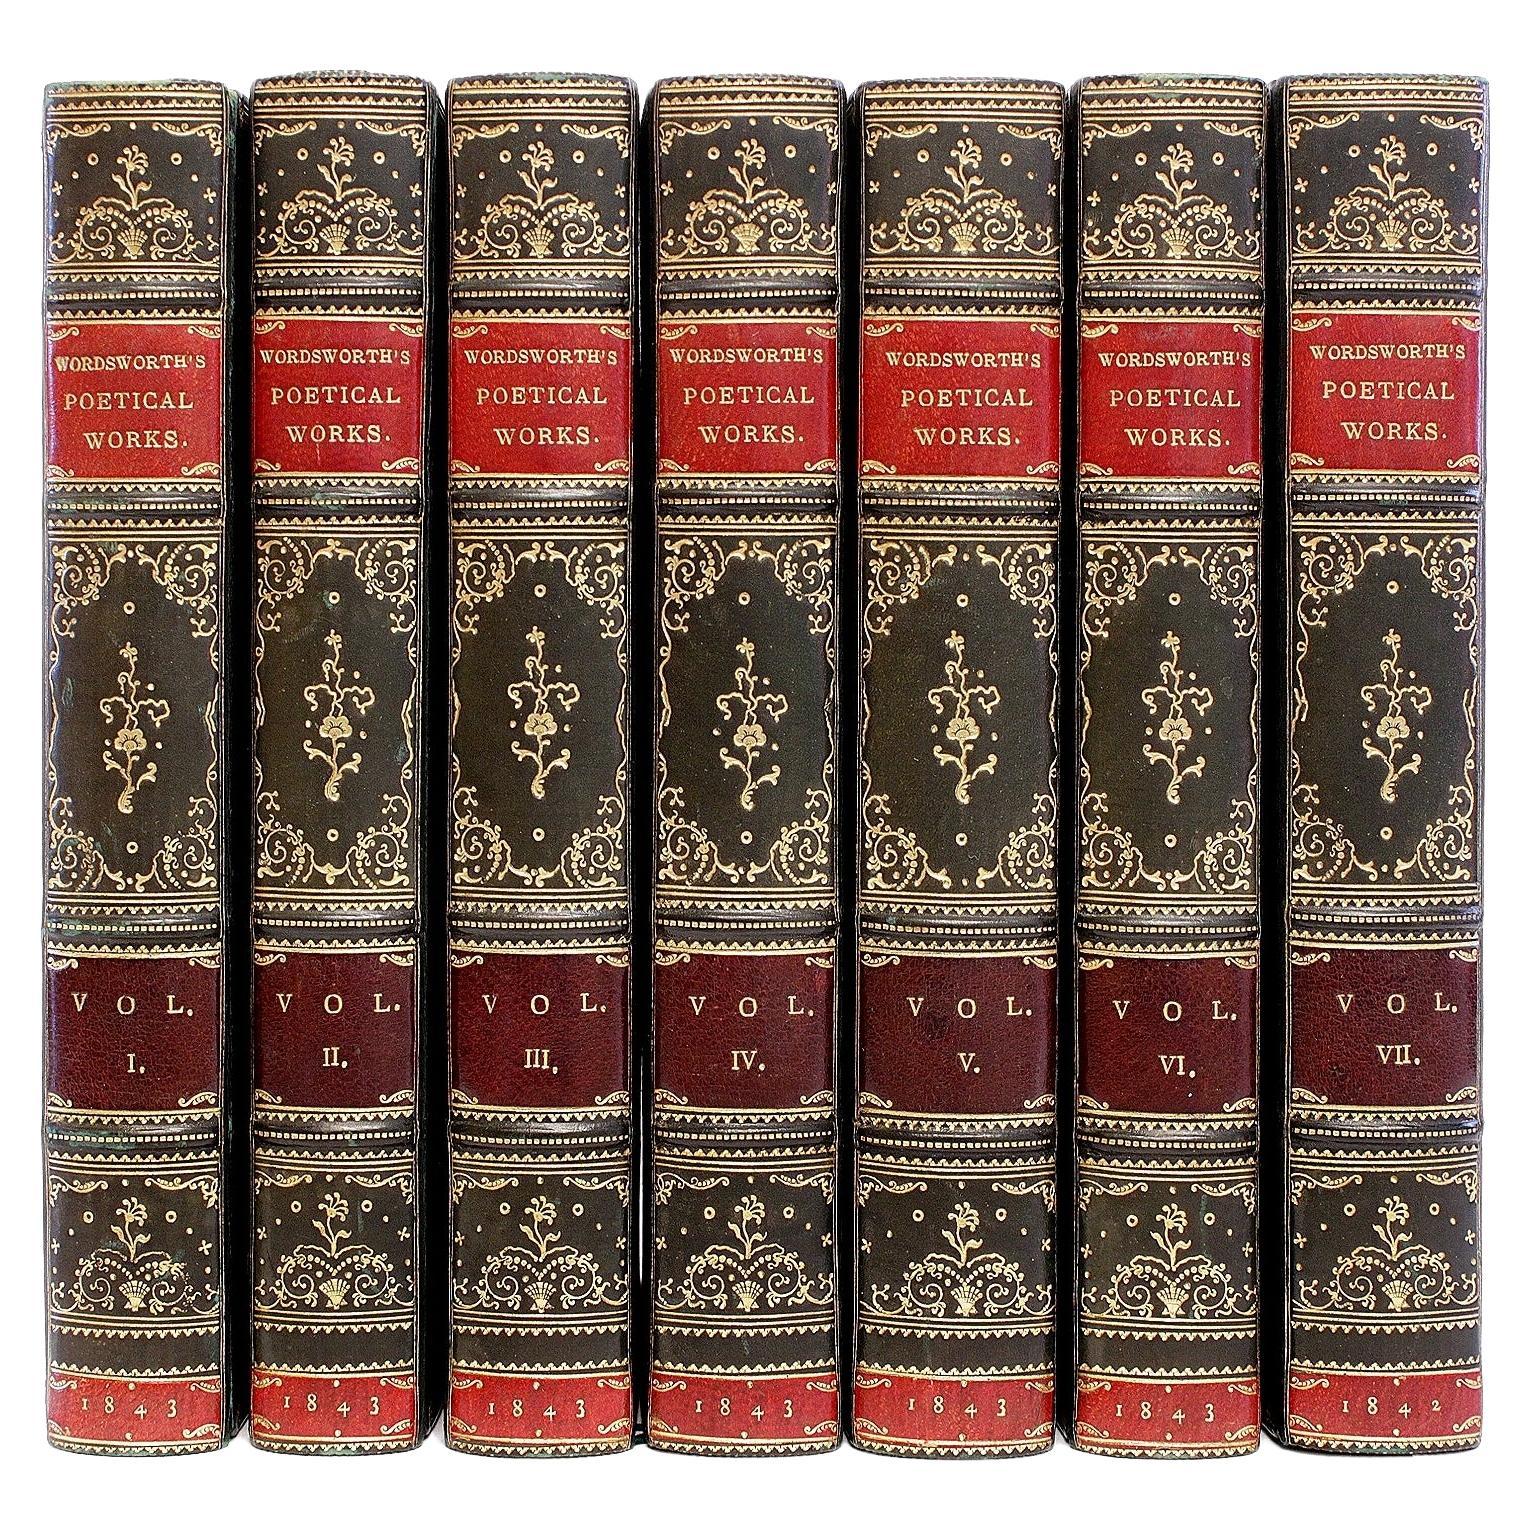 Poetical Works of William Wordsworth - 7 vols. - IN A FINE FULL LEATHER BINDING For Sale